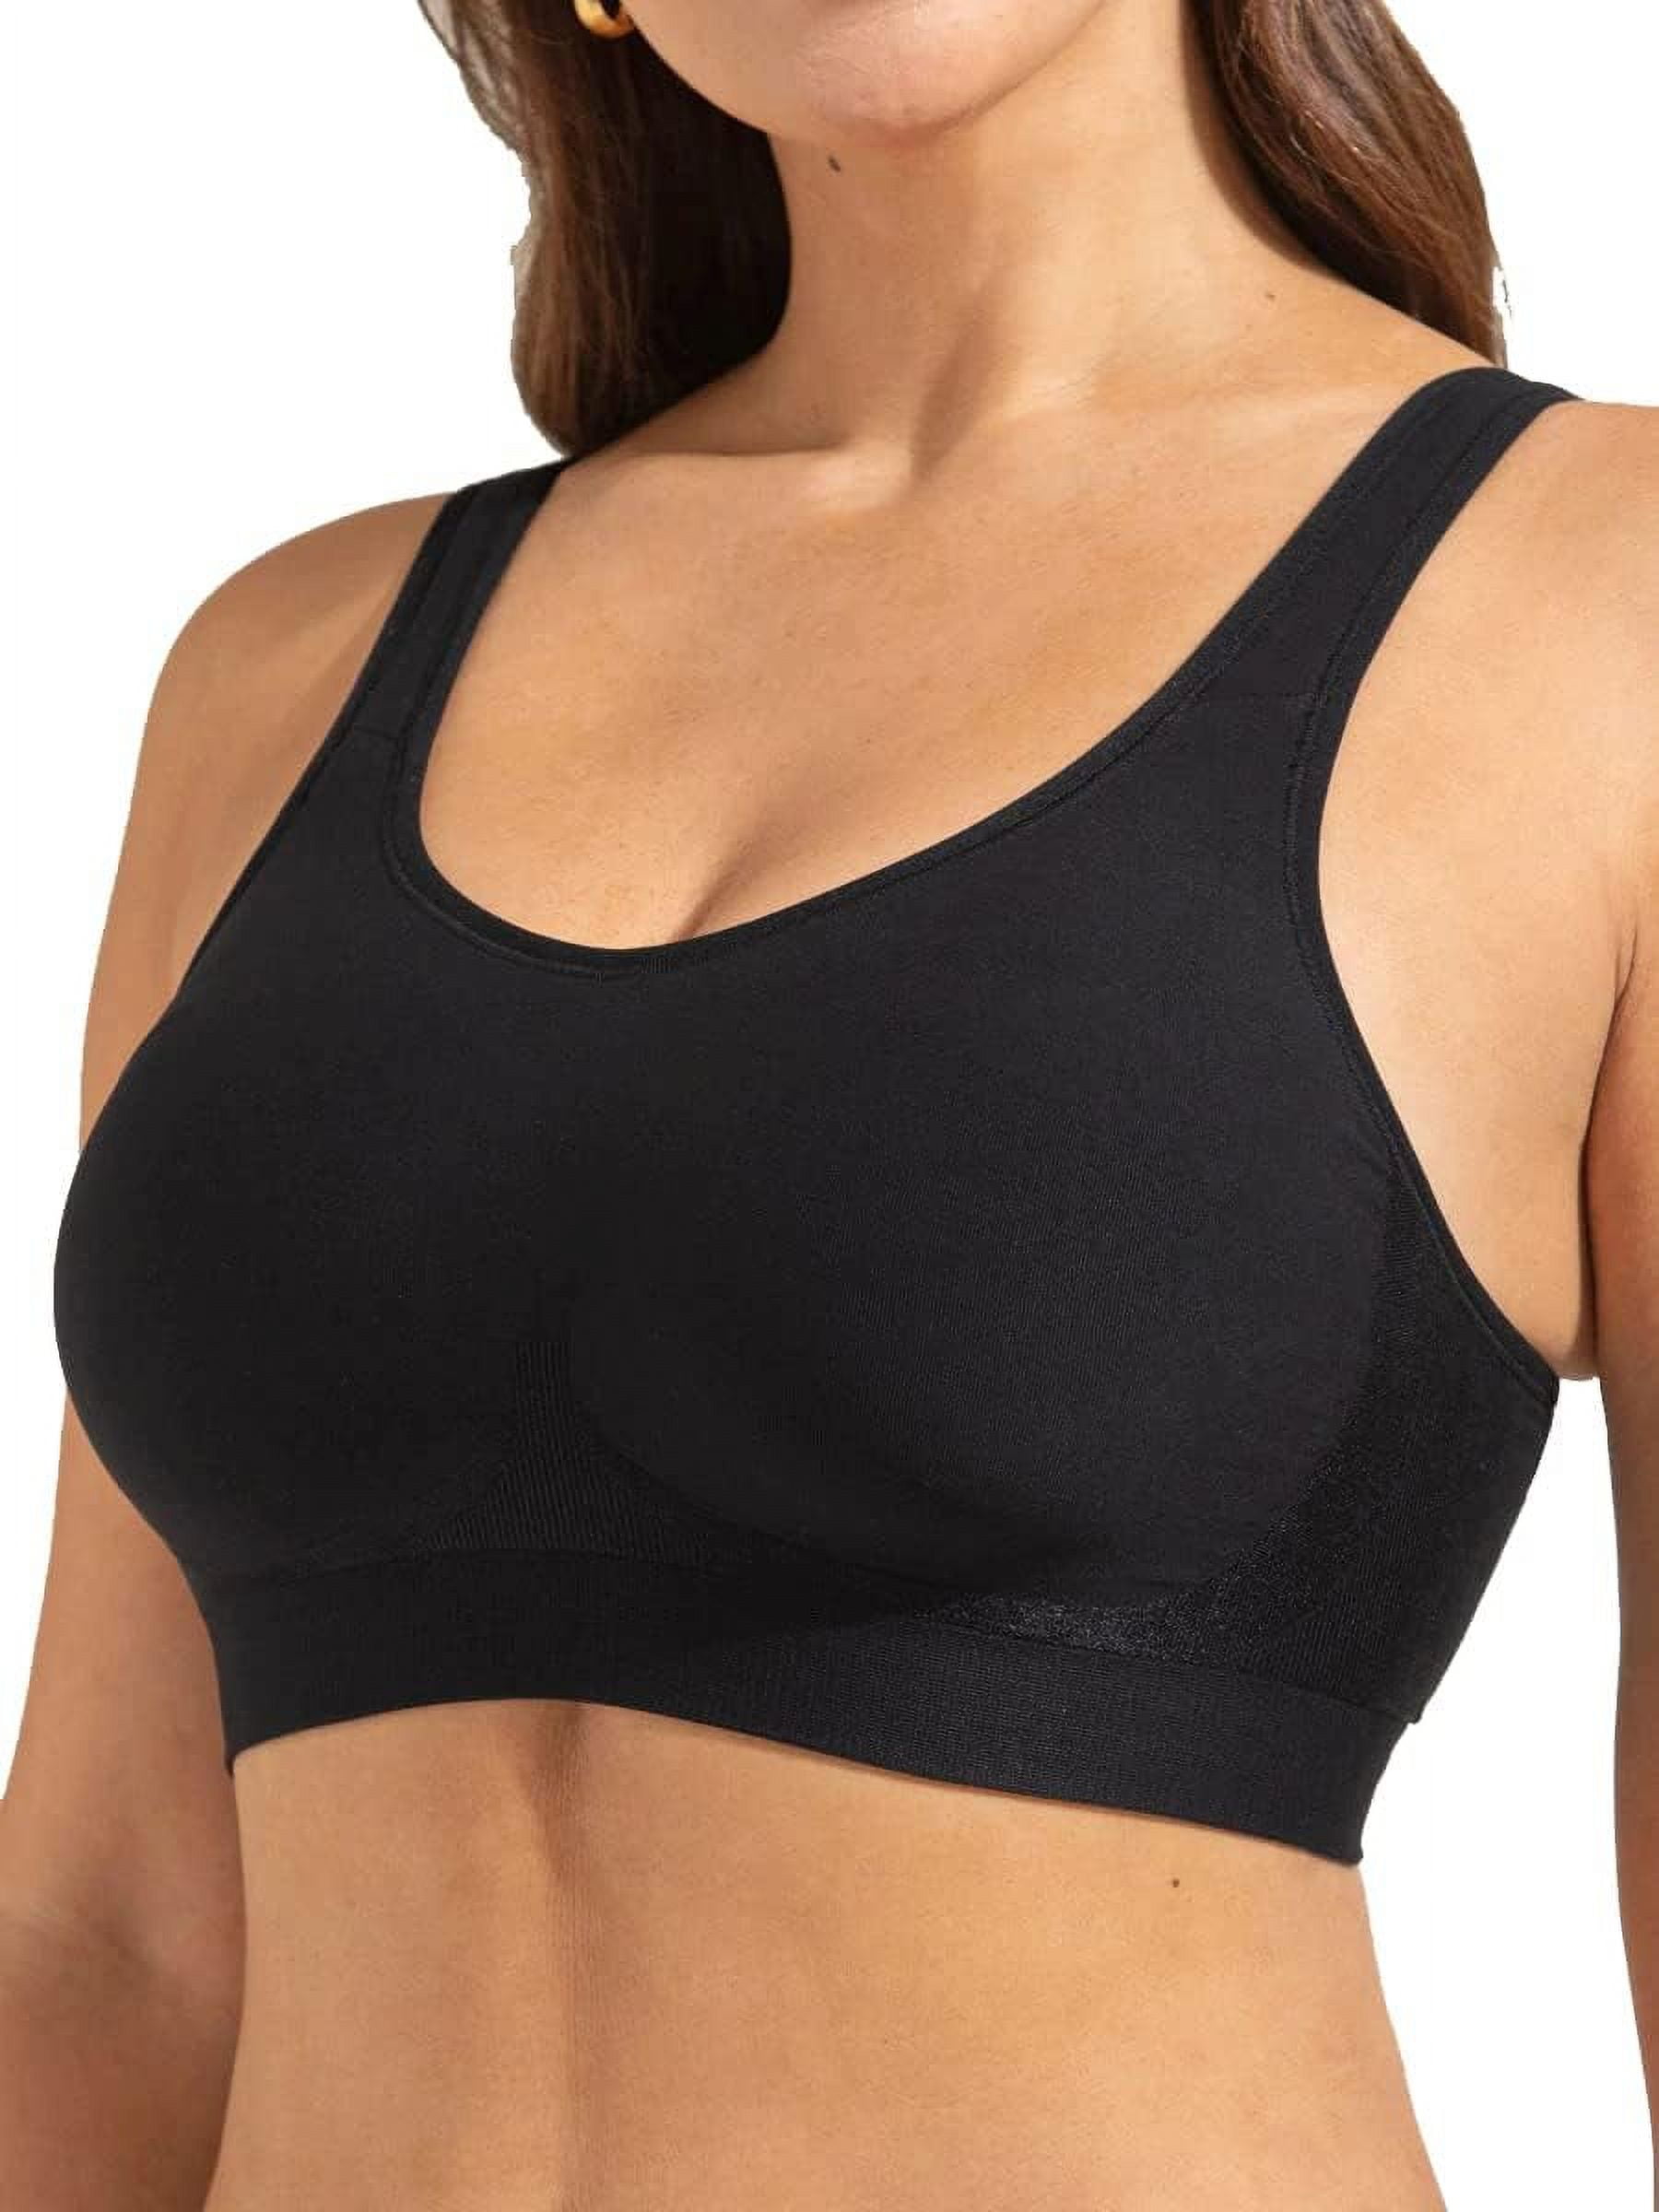 SHAPERMINT Enhanced Smoothing Wireless Bralette for Women with Support, Seamless Bra with Removable Cups, from Small to Plus Size